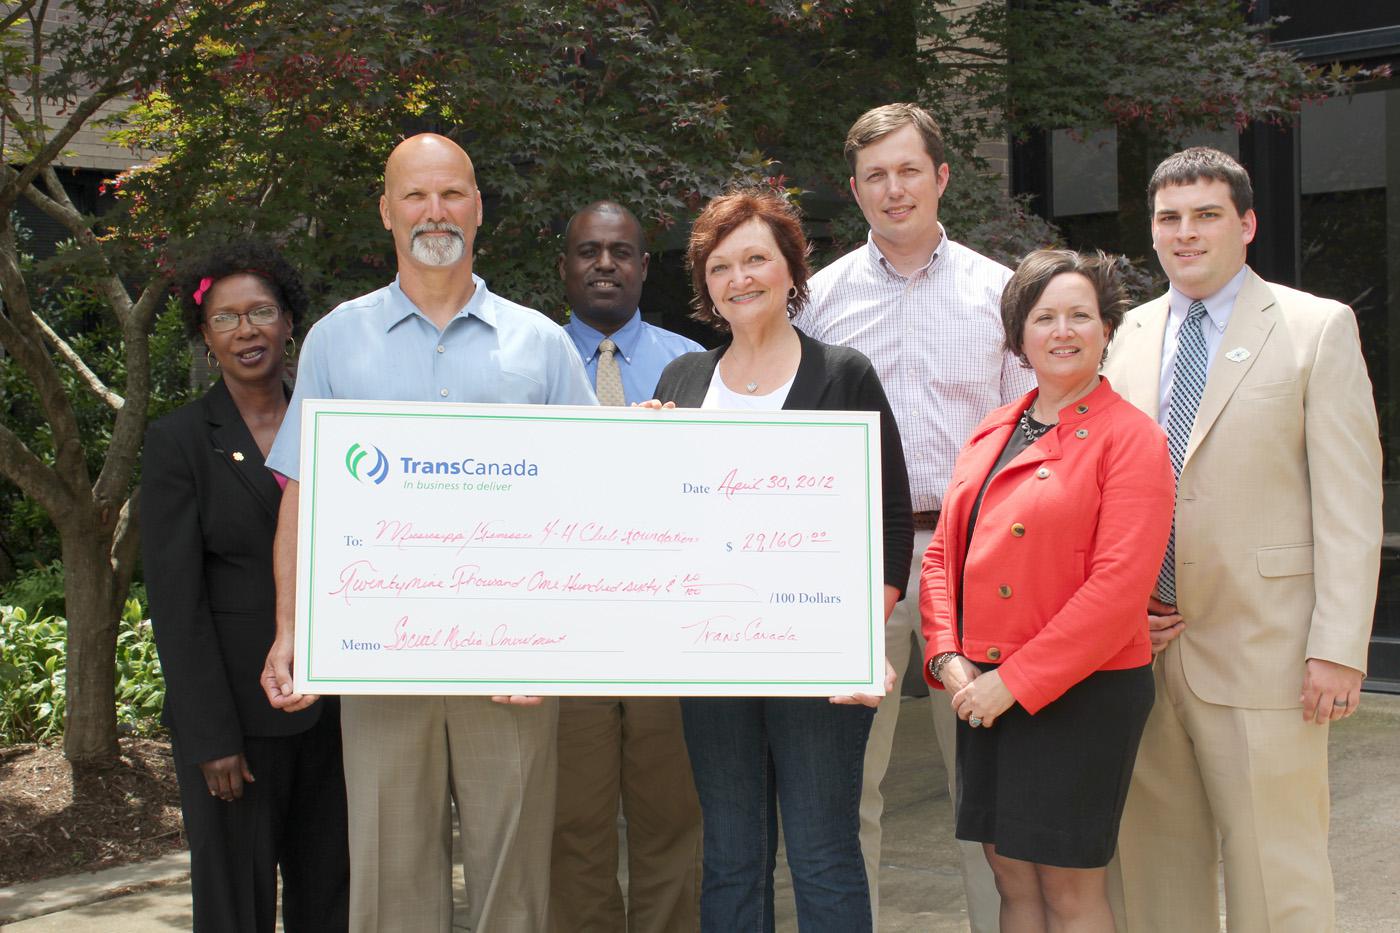 Representatives from TransCanada, Mississippi State University Extension Service and the University of Tennessee met in Jackson, Tenn. for a check presentation ceremony celebrating the donation of nearly $30,000 to 4-H. Those present include (front, from left) James Ethridge, Sardis area manager, TransCanada; Laura Noble, mid-America region, community investment coordinator, TransCanada; and Donna Eason-Pile, assistant development director, UT Extension; (back, from left) Paula Threadgill, interim program l